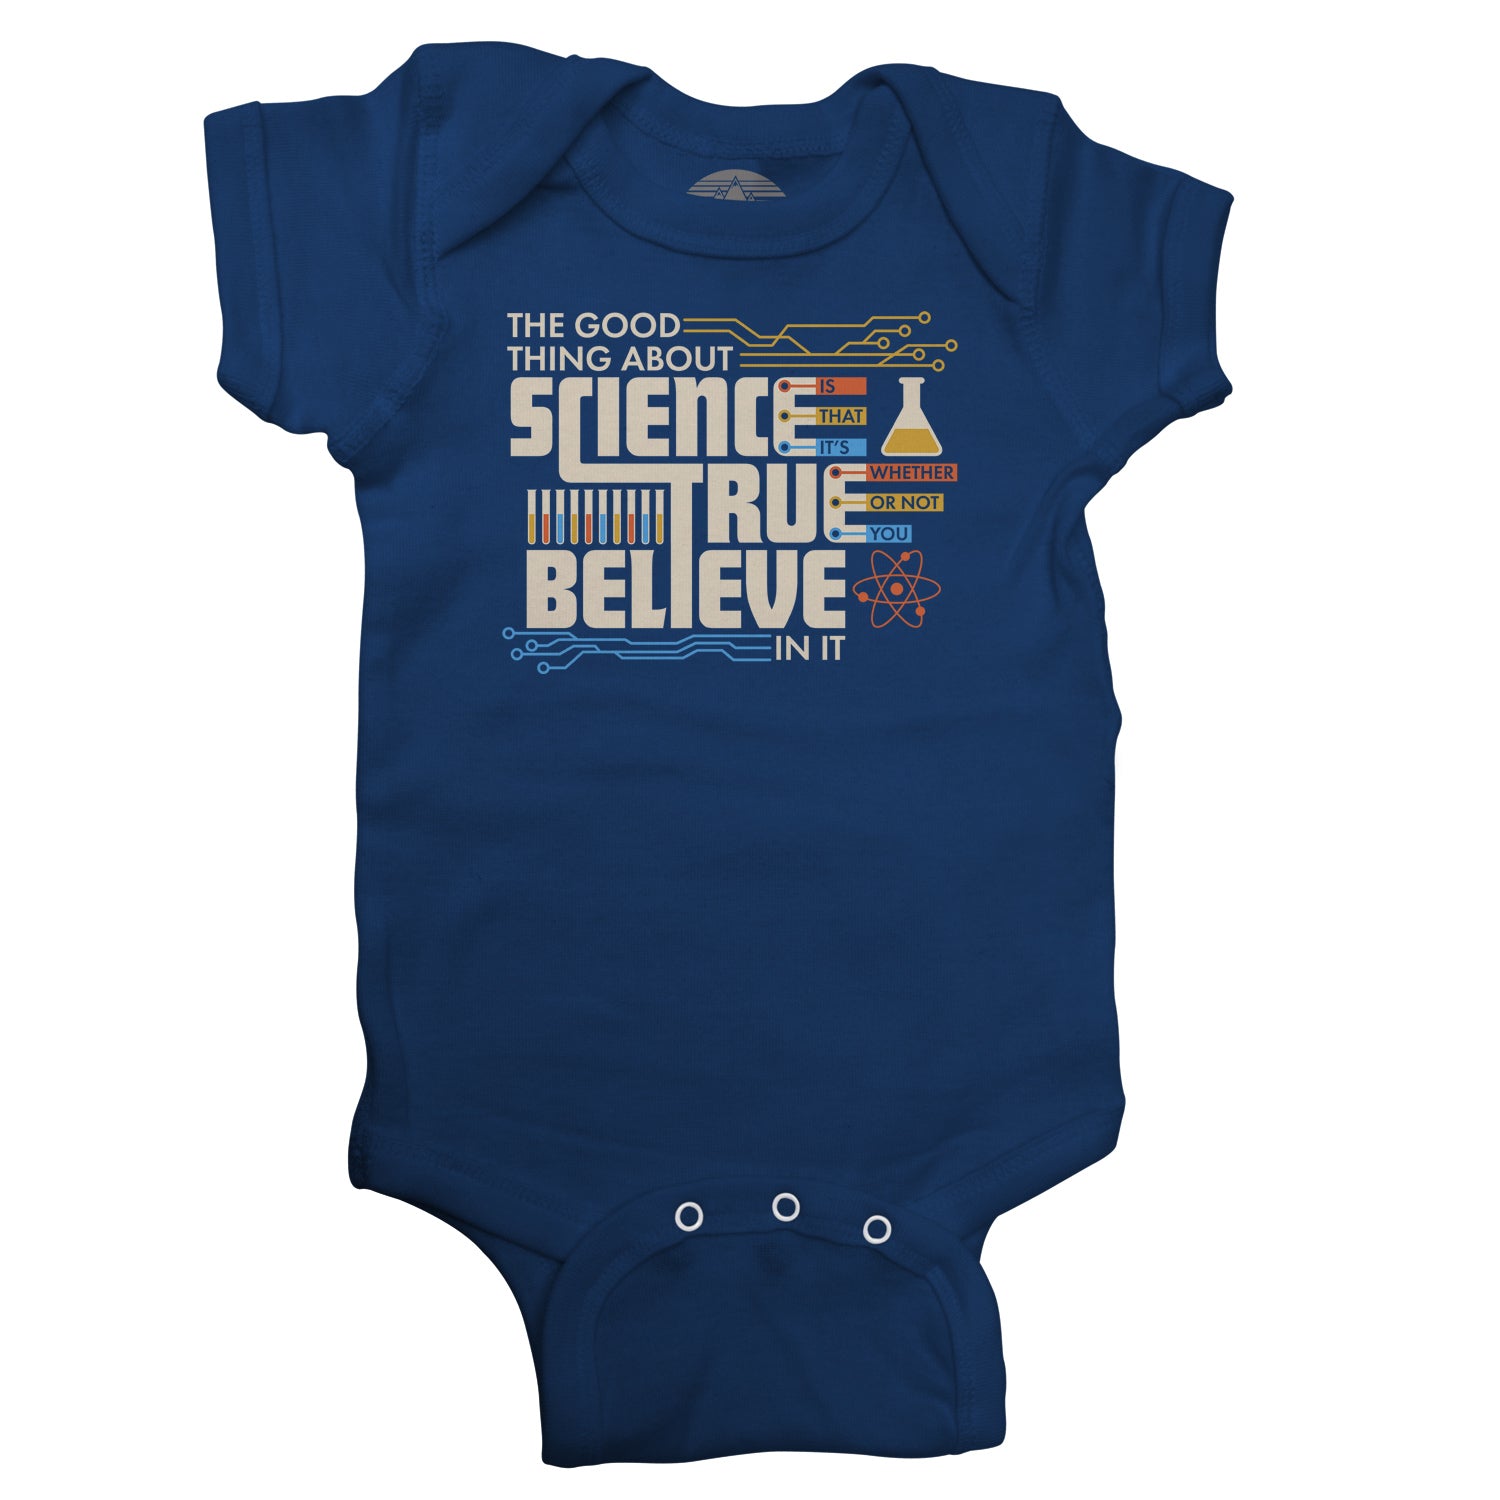 The Good Thing About Science Is That It's True Infant Bodysuit - Unisex Fit